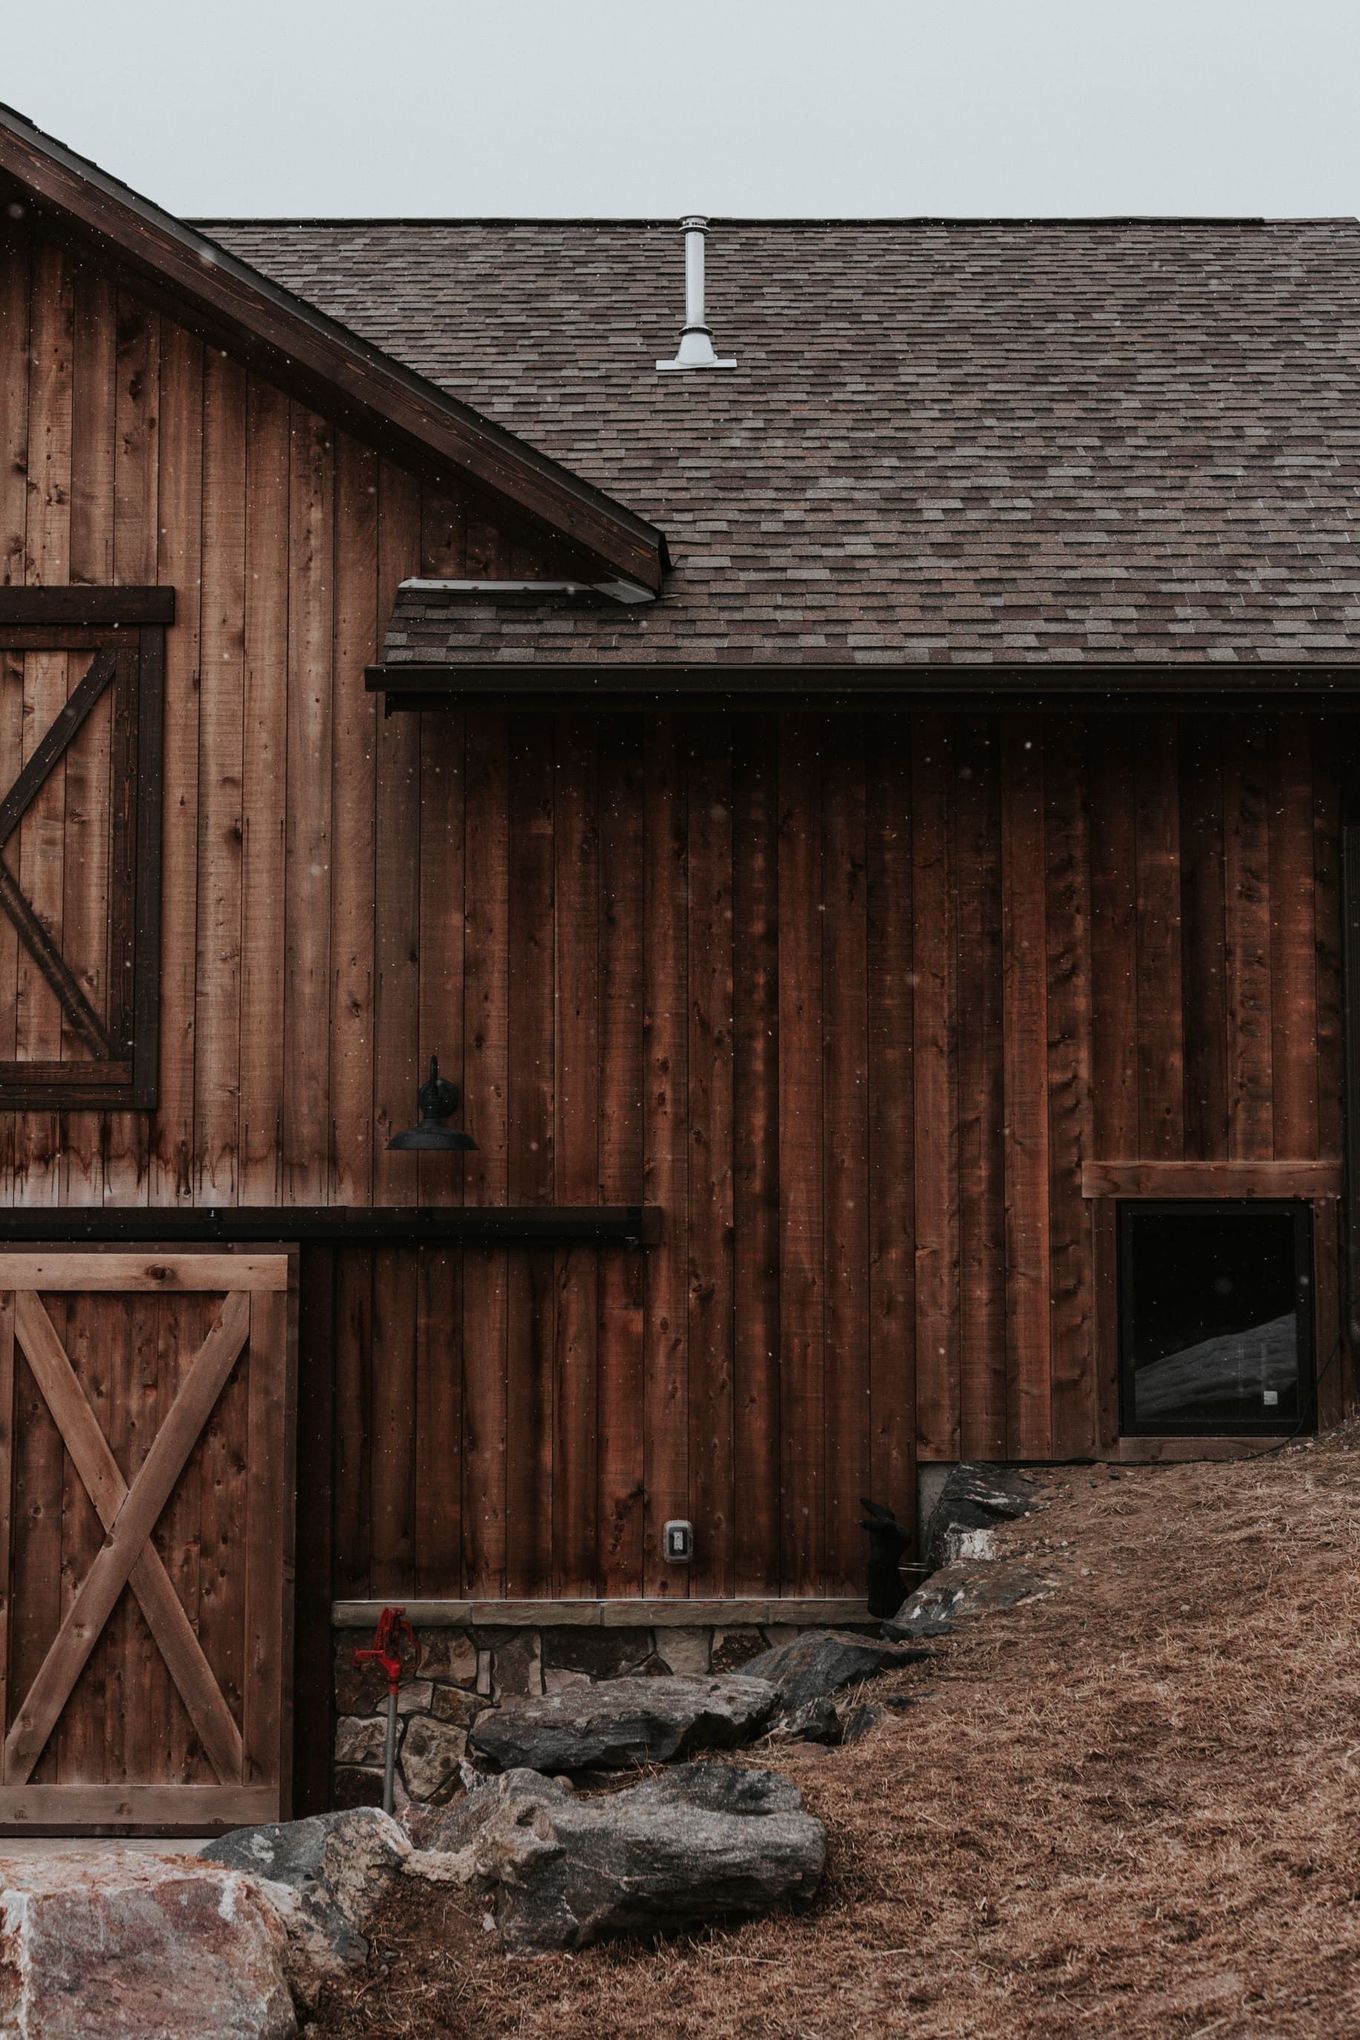 A wooden barn with a roof and a door.